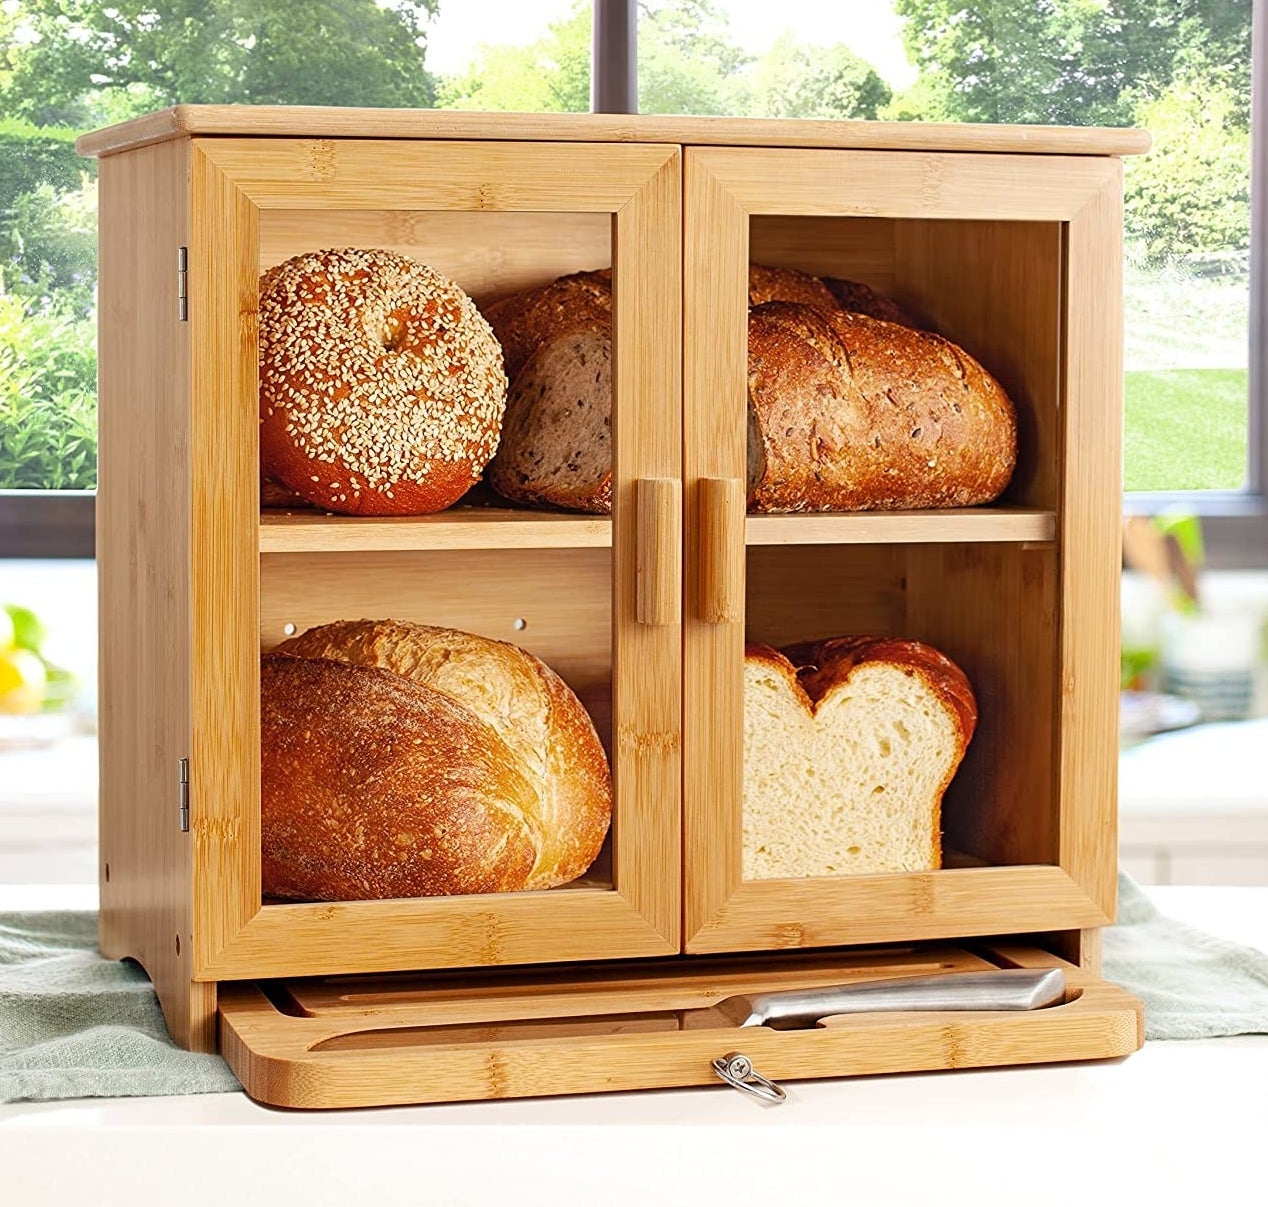 bamboo bread box with various loaves and rolls inside